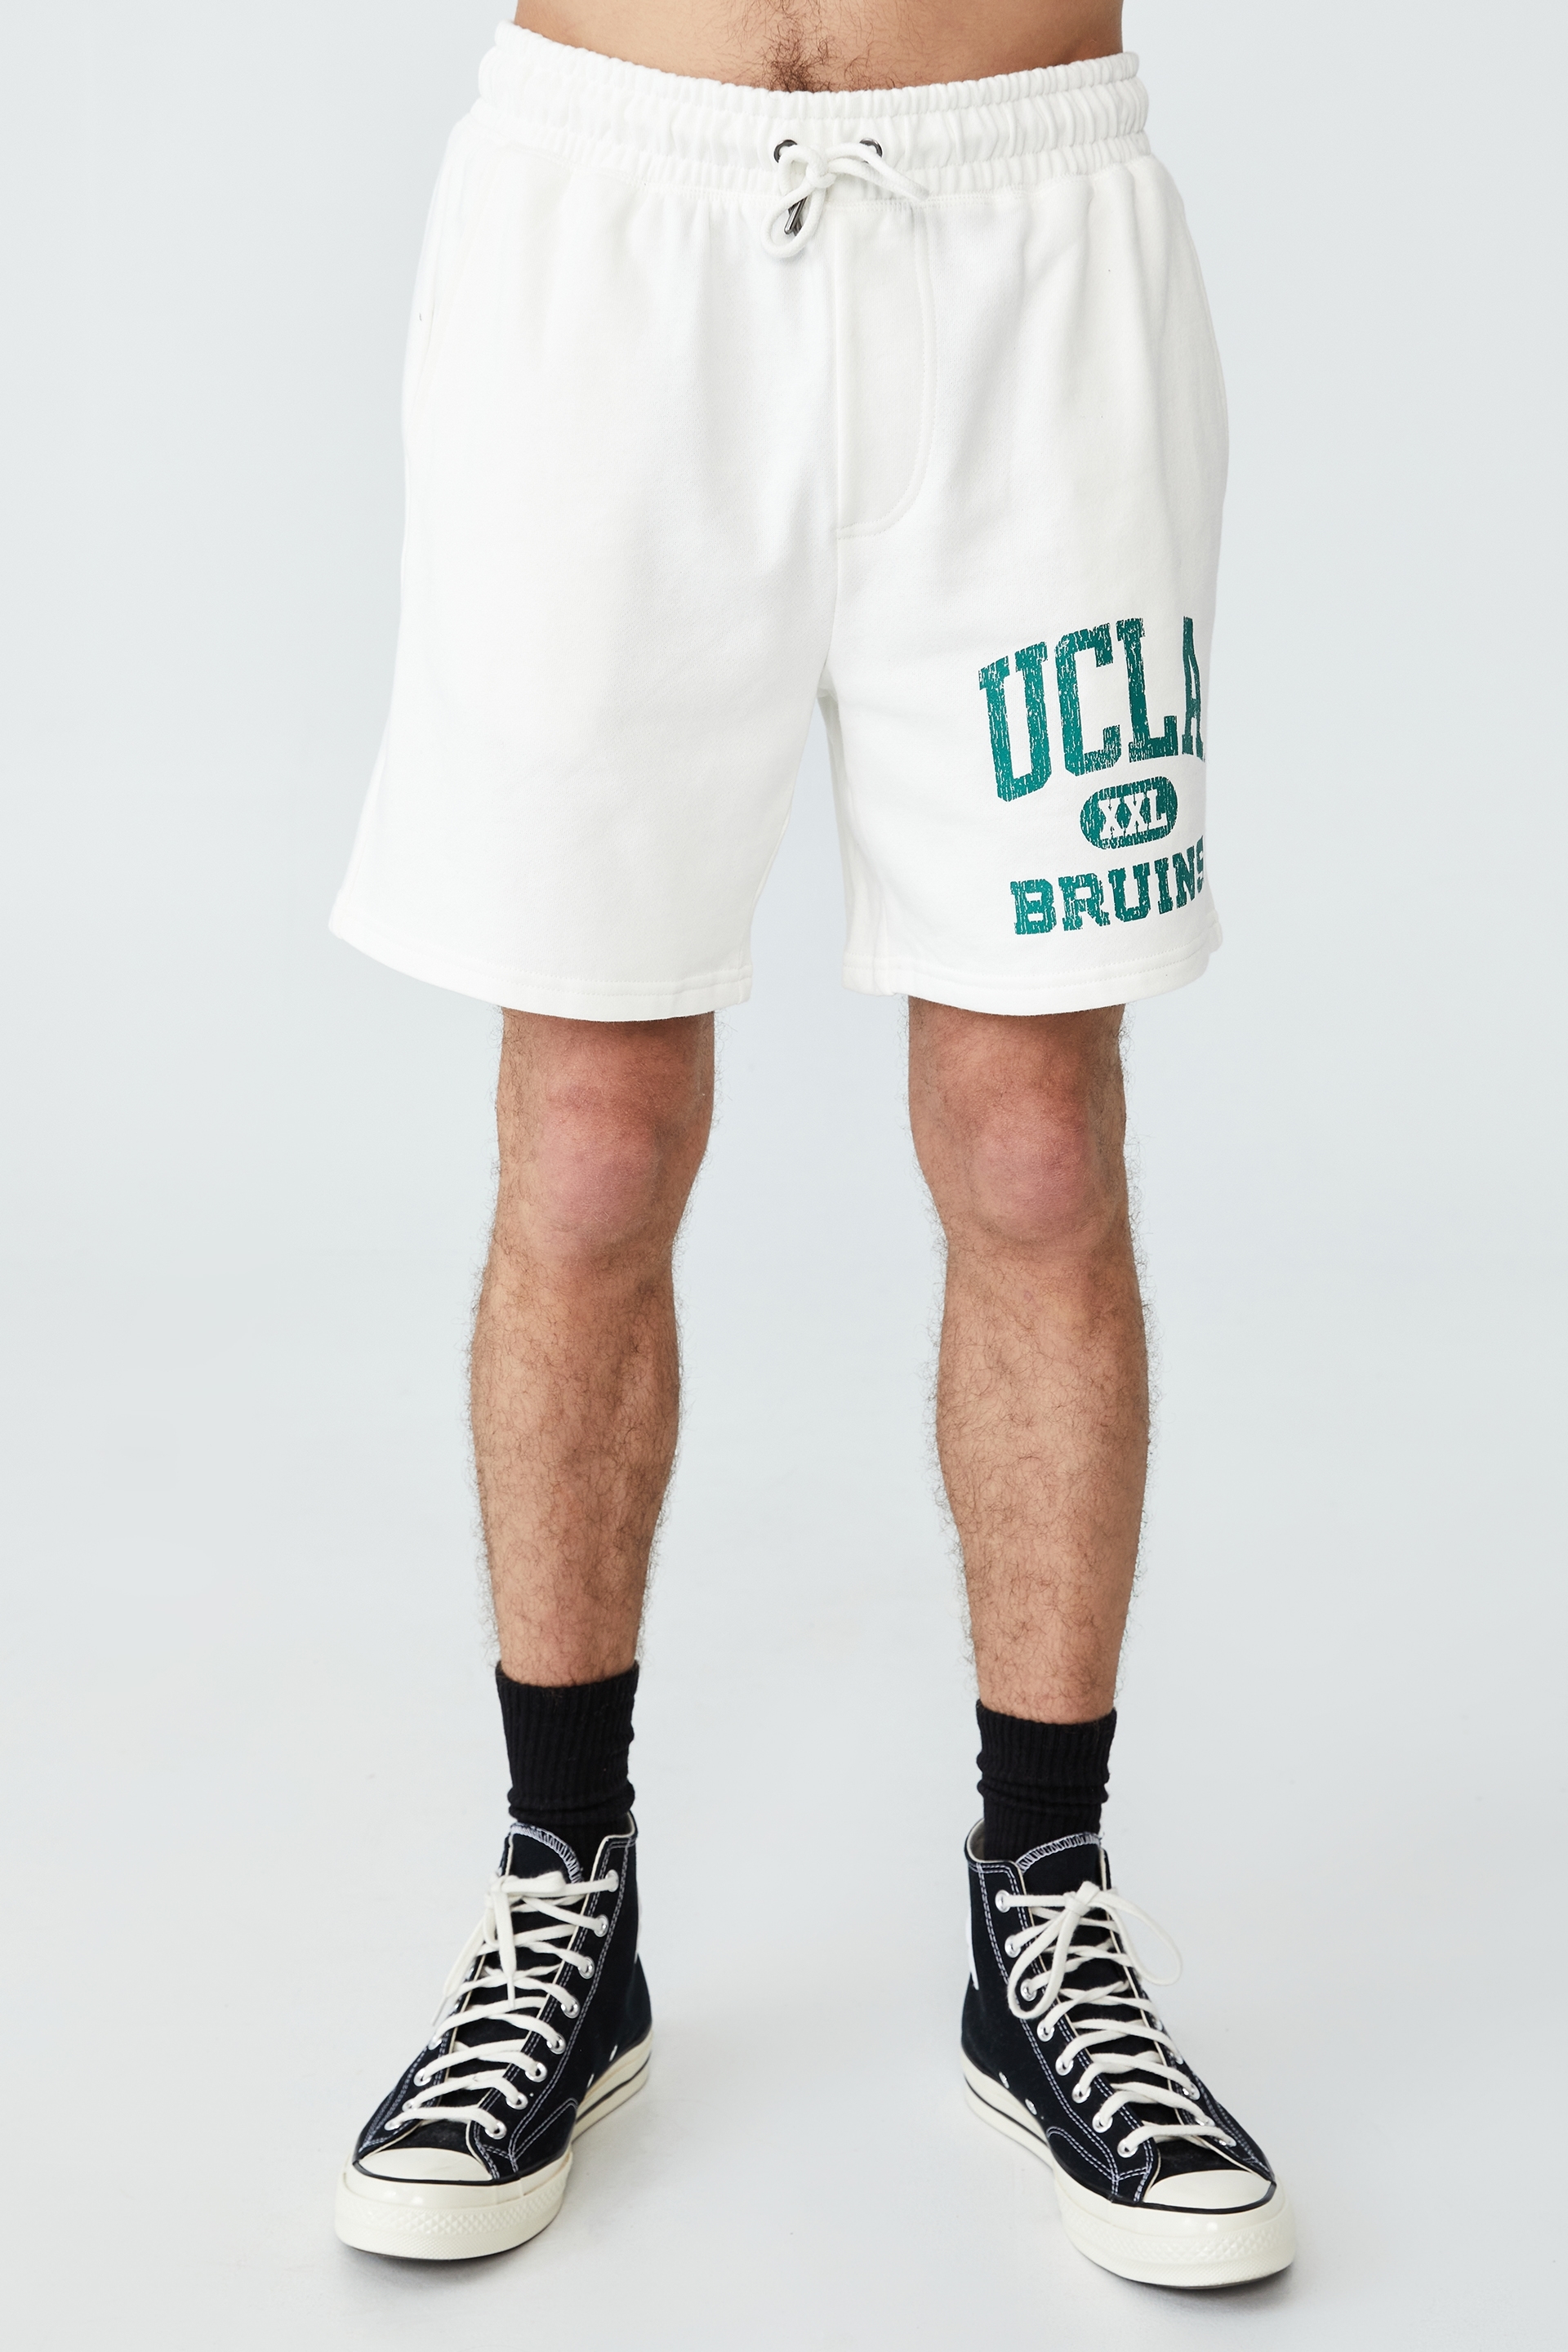 Cotton On Men - Special Edition Track Short - Lcn ucl vintage white/ucla - xxl